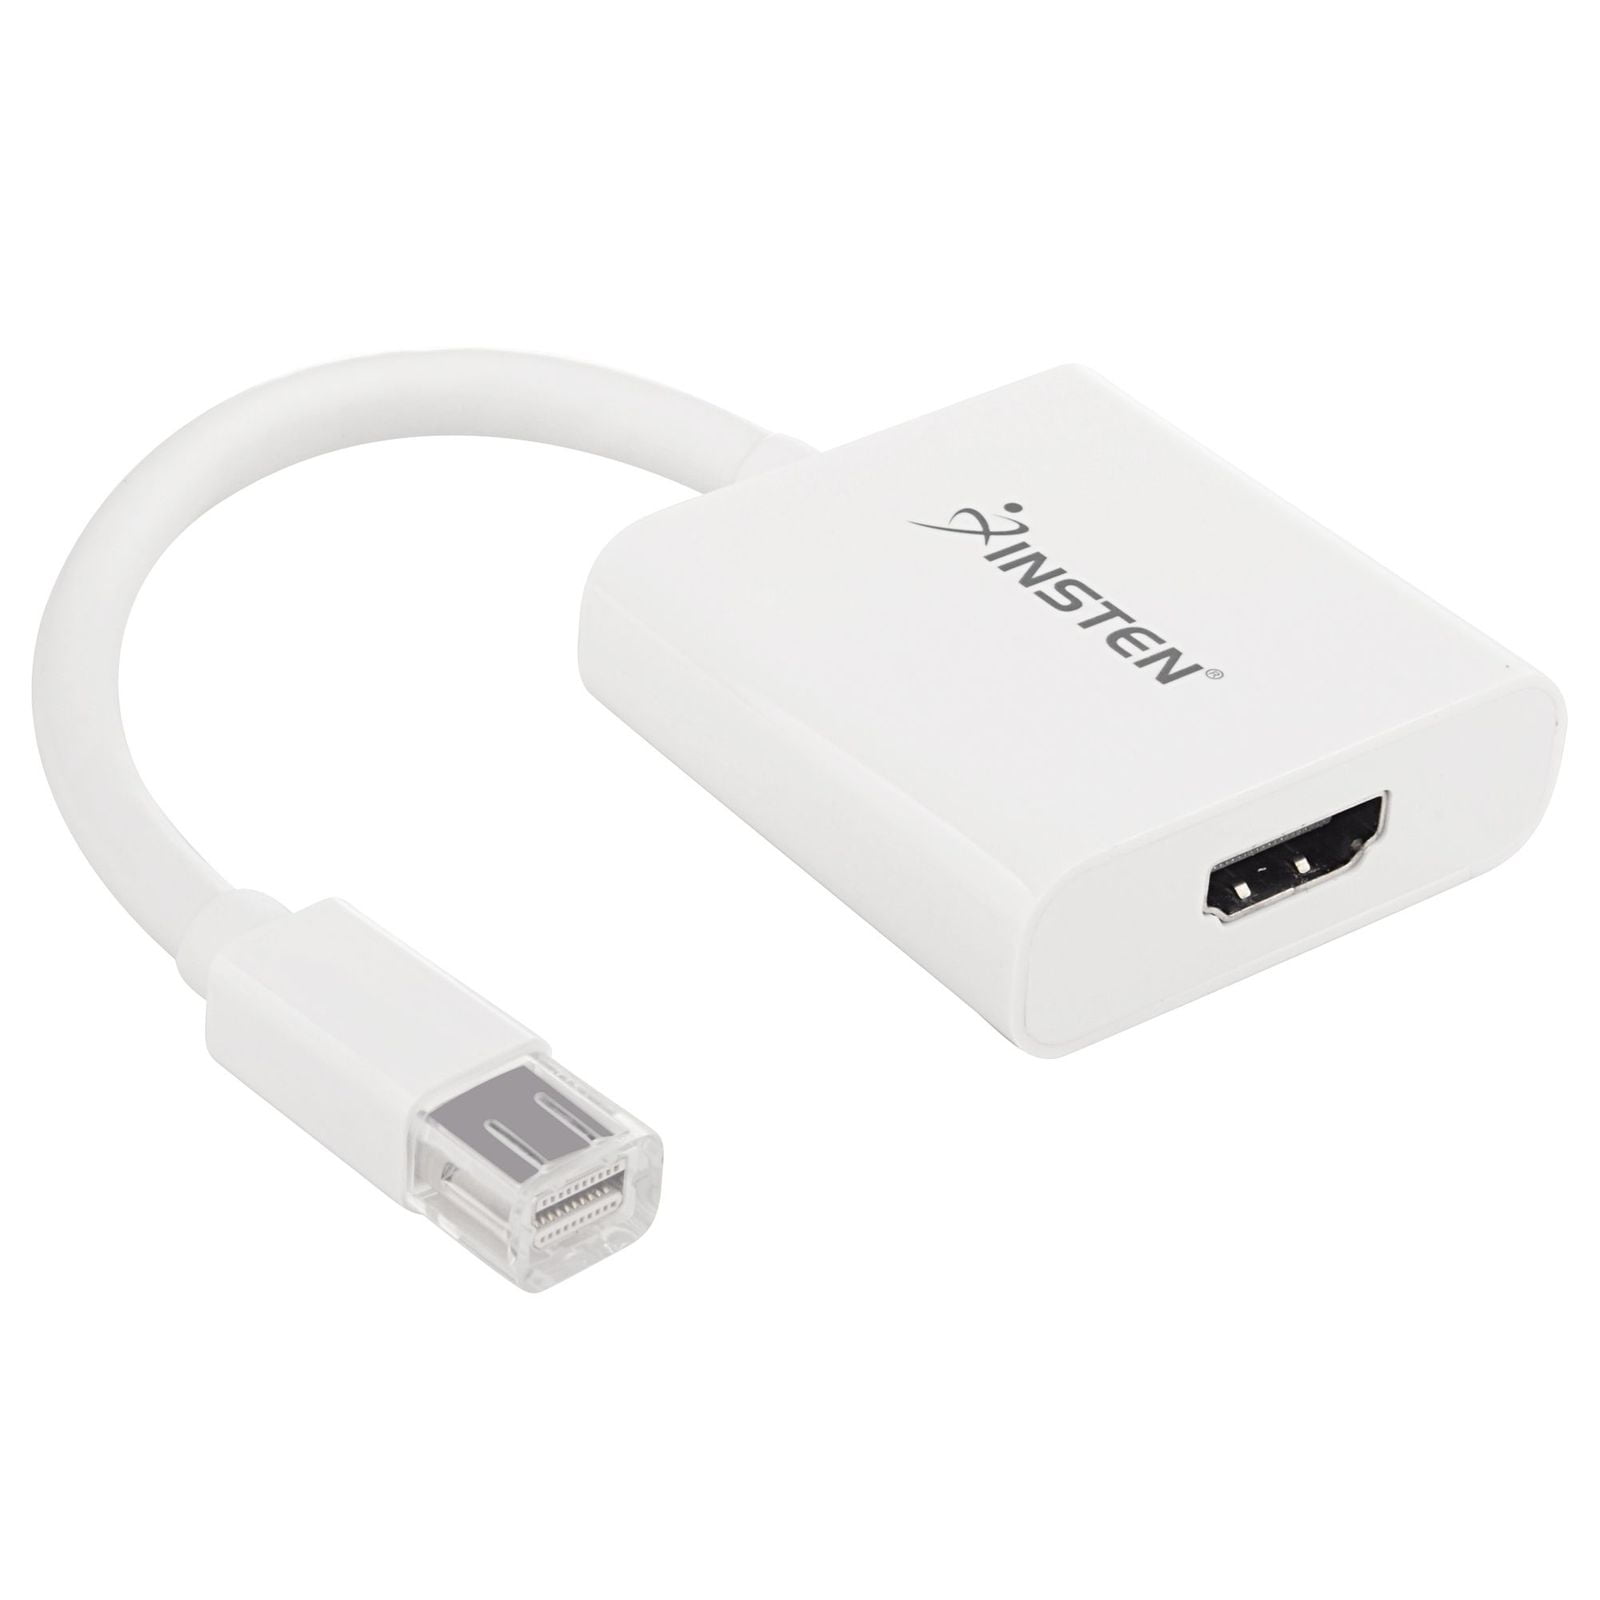 Anbear MacBook Air Thunderbolt to HDMI Cable Microsoft Surface Pro Mini Displayport to HDMI Adapter Gold-Plated Display Port to HDMI Adapter Compatible with MacBook Pro MacBook Air Mac Mini